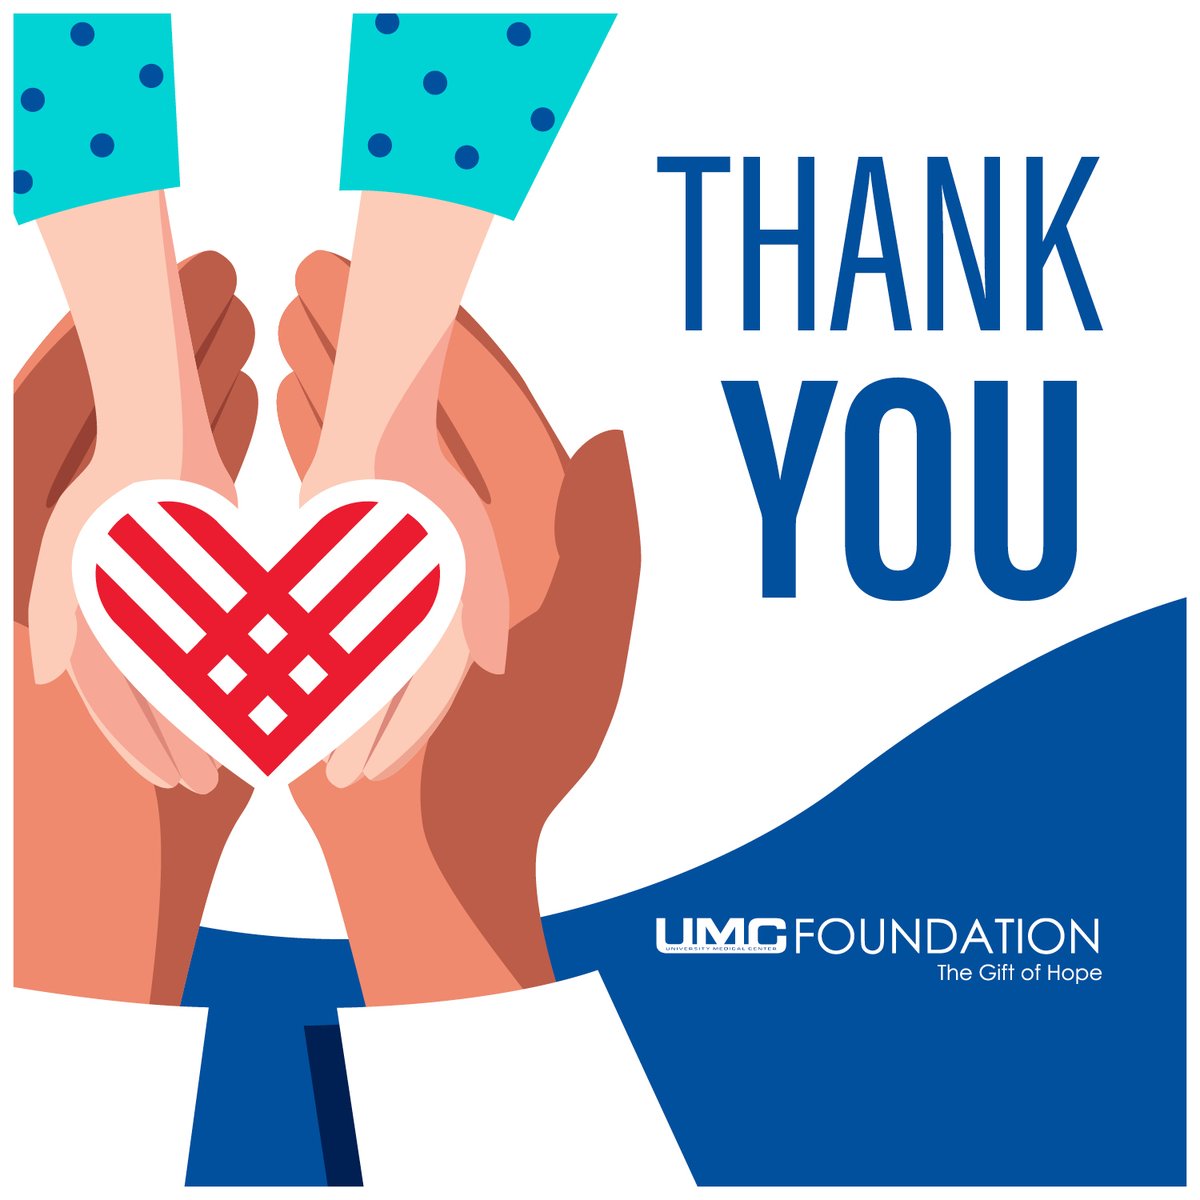 ❤👏Thank you to everyone who donated or bid in our #GivingTuesday Donation Drive and Online Auction. Your support will help us enhance the healing environment and bring more comforting items to the bedsides of patients at @UMCSN and UMC Children's Hospital!